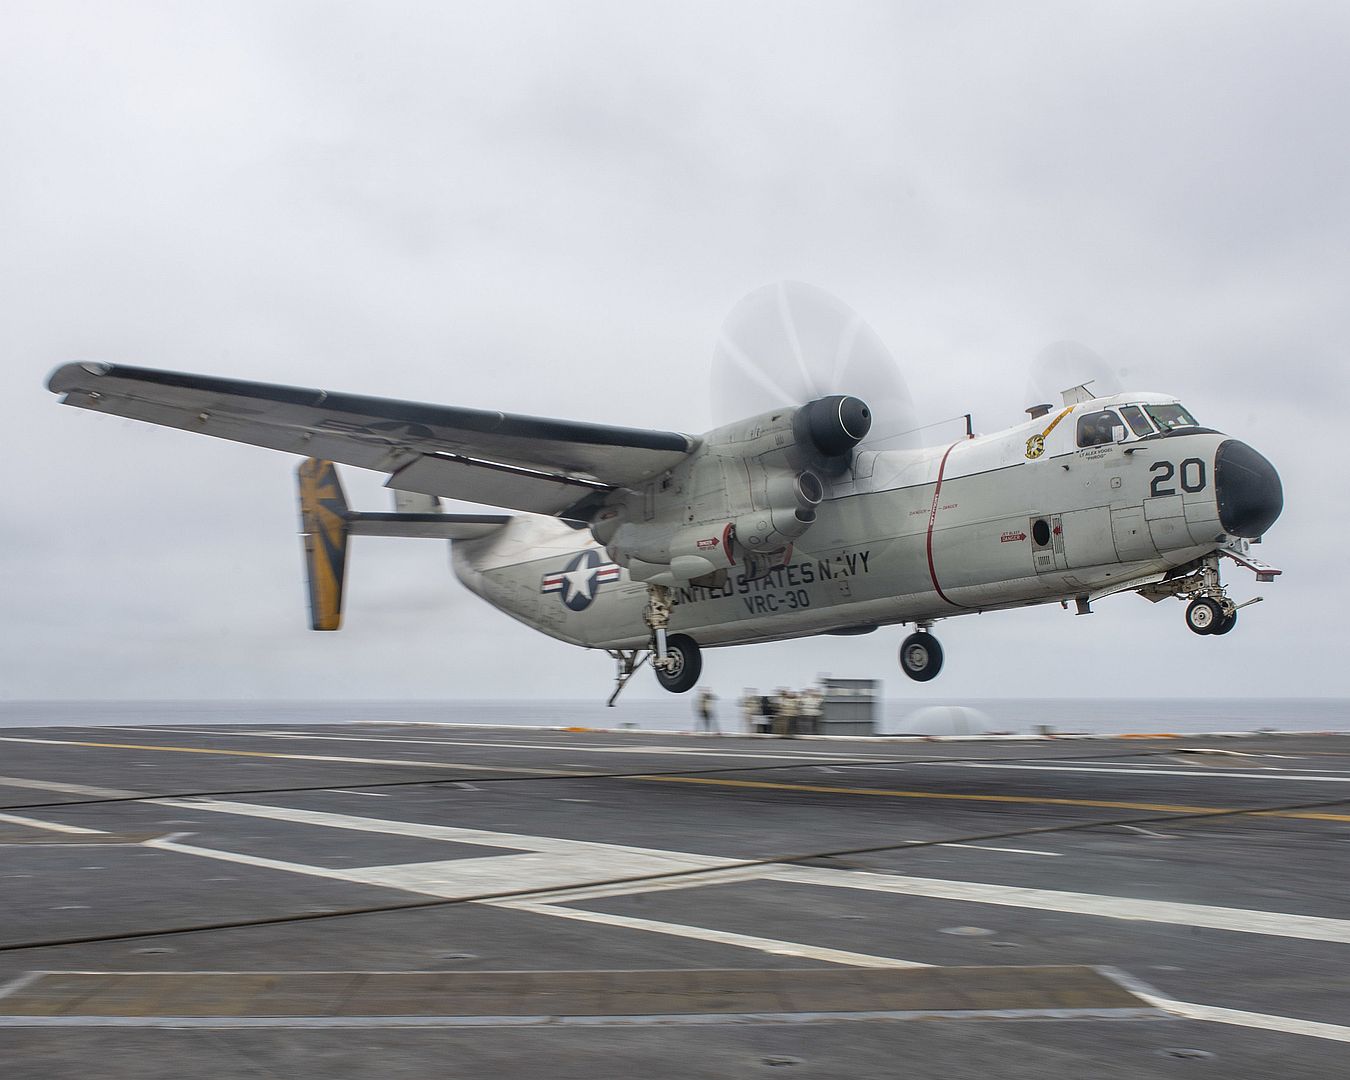 2A Greyhound From The Providers Of Fleet Logistics Support Squadron 30 Prepares To Make An Arrested Gear Landing On The Flight Deck Of The Aircraft Carrier USS Nimitz